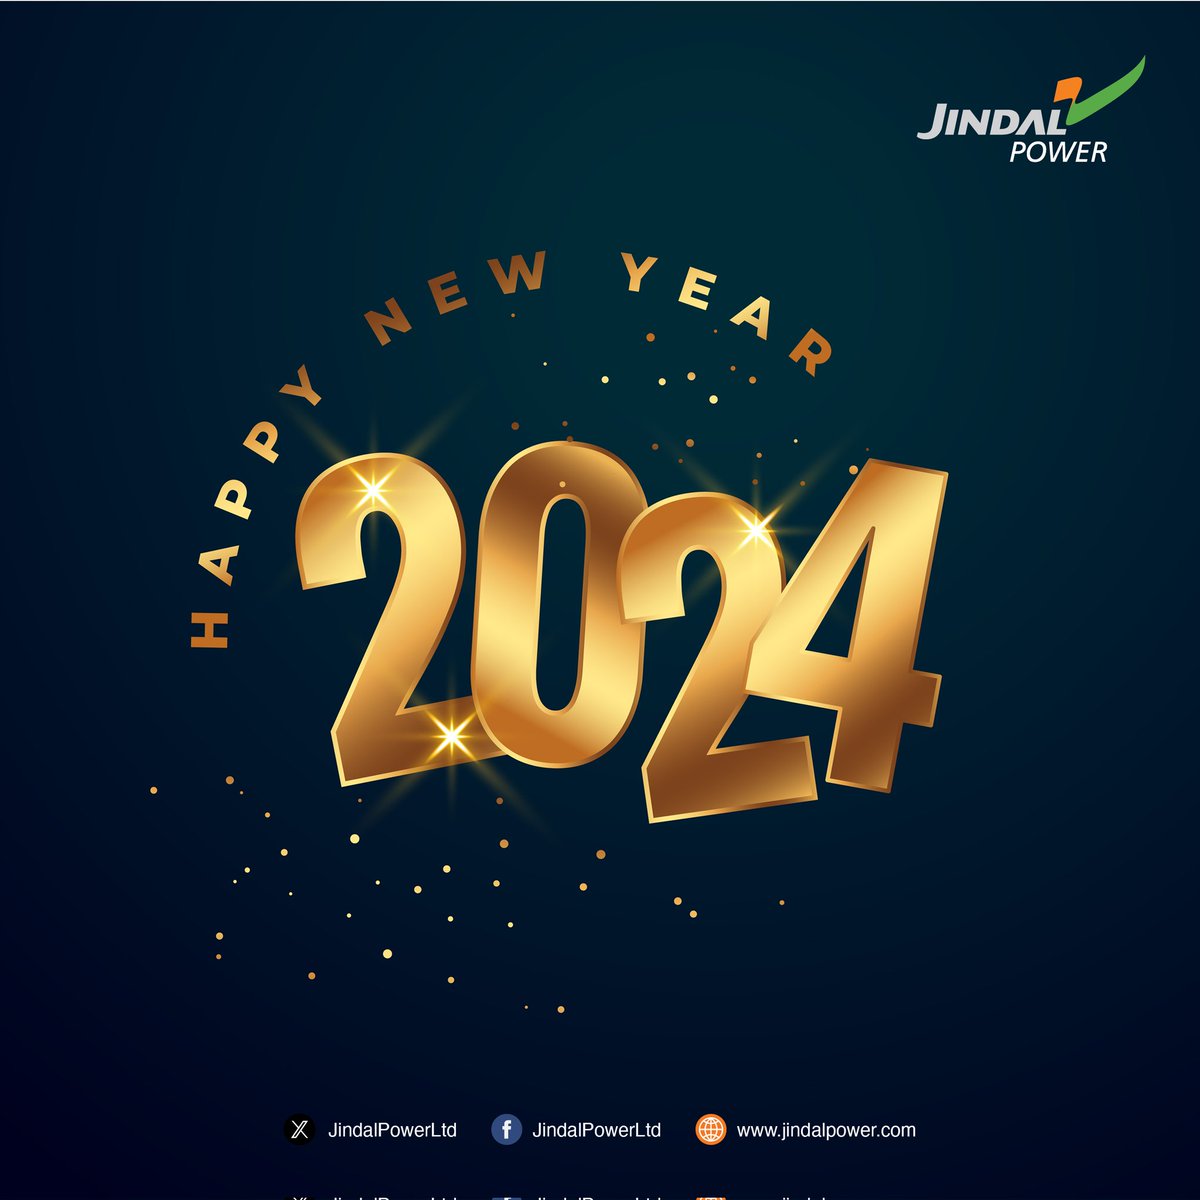 Happy New Year. Wish the New Year 2024 brings bliss, peace & prosperity to one and all. #Welcome2024